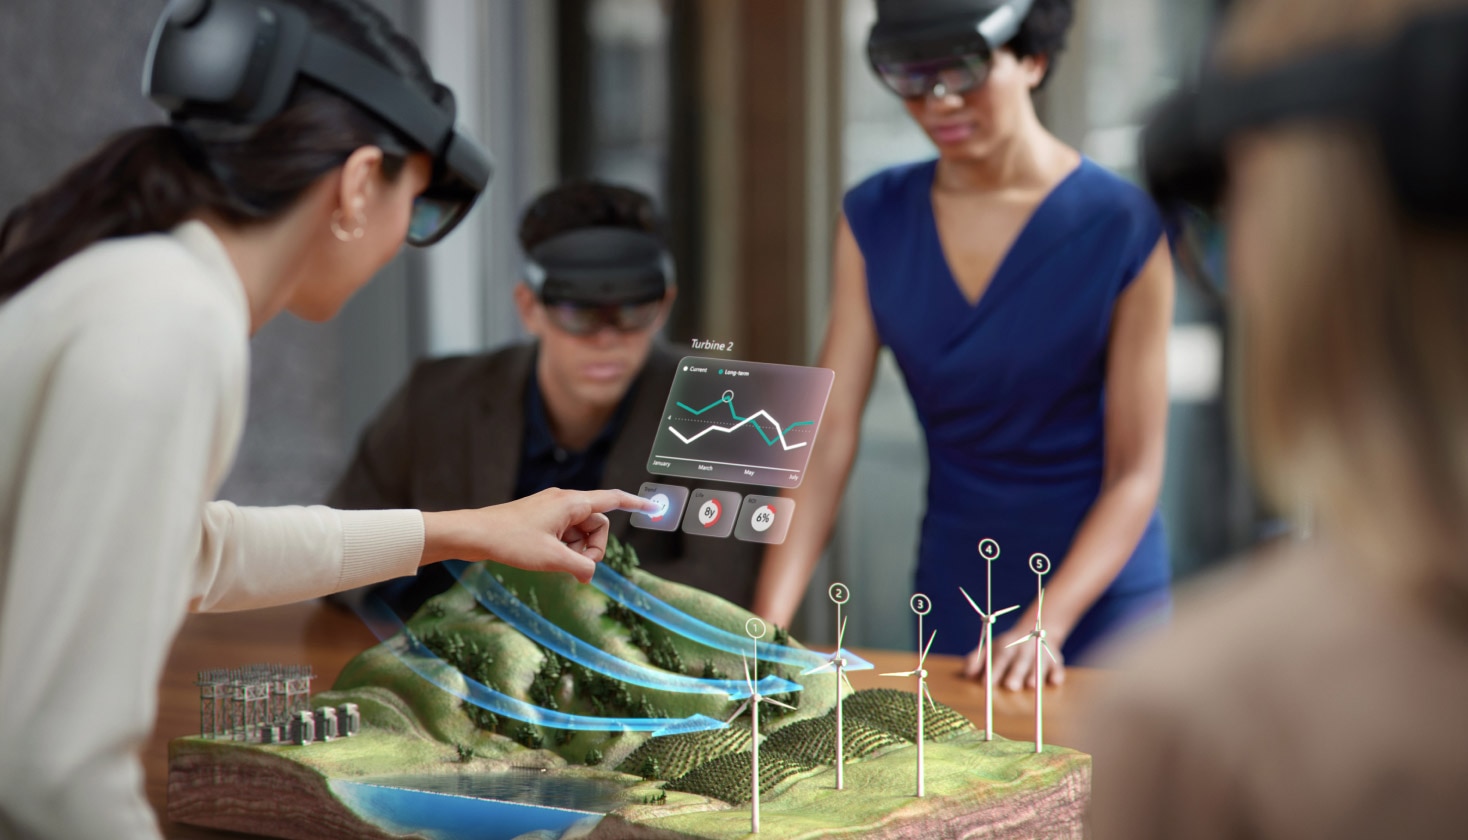 “A group of people working in augmented reality.” Image and alt text by Microsoft. Original image located here: https://dynamics.microsoft.com/en-us/mixed-reality/guides/what-is-augmented-reality-ar/